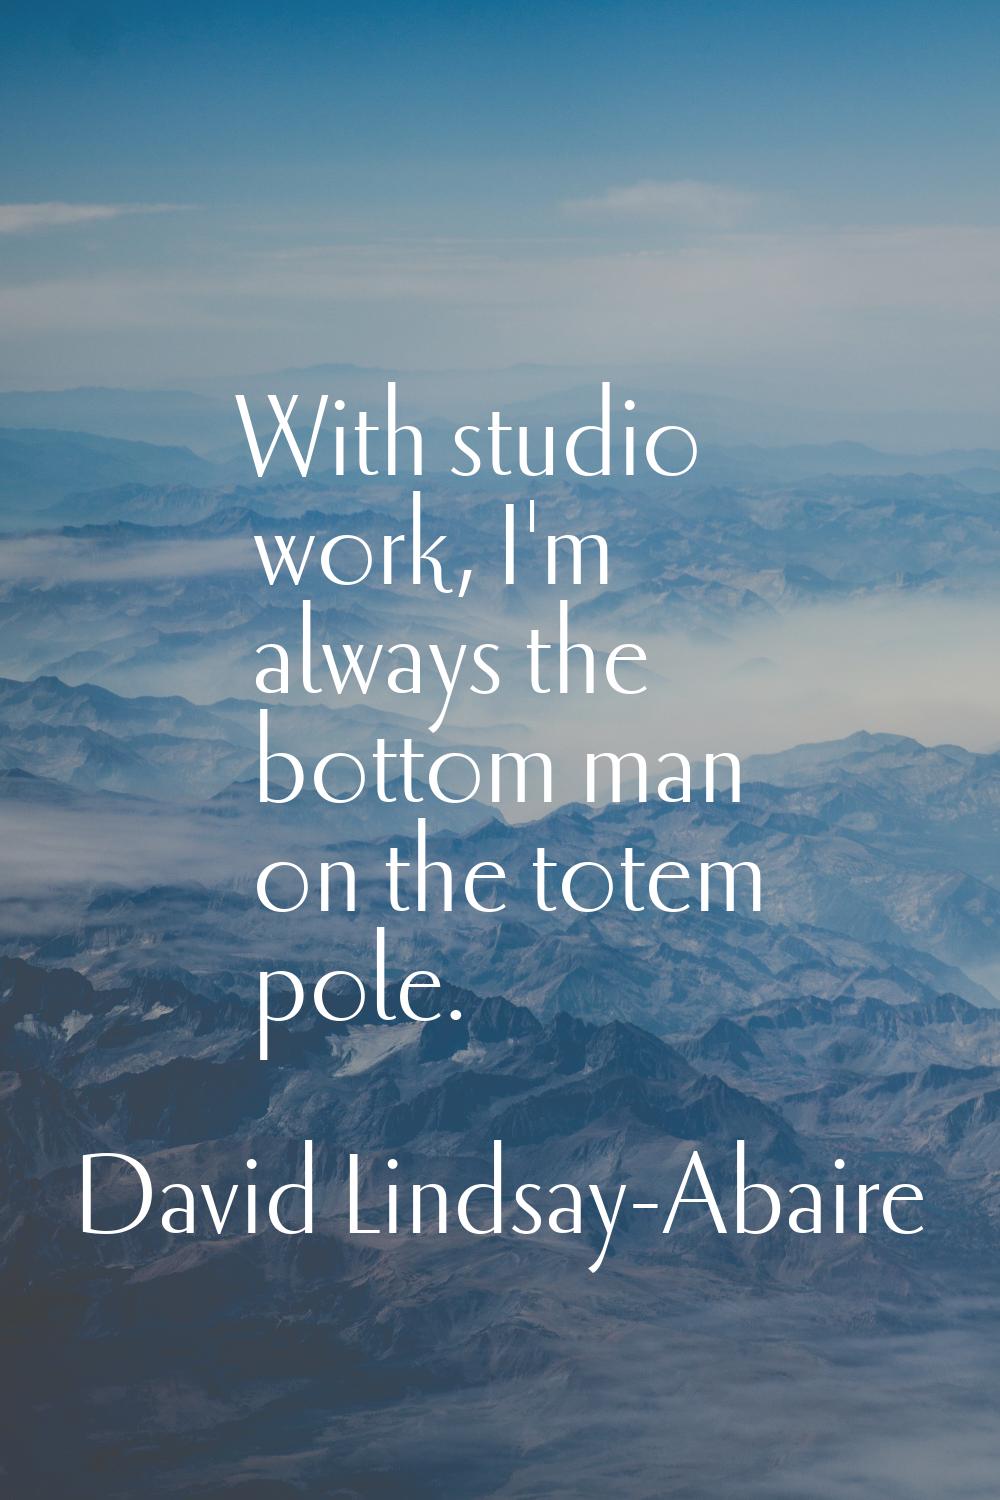 With studio work, I'm always the bottom man on the totem pole.